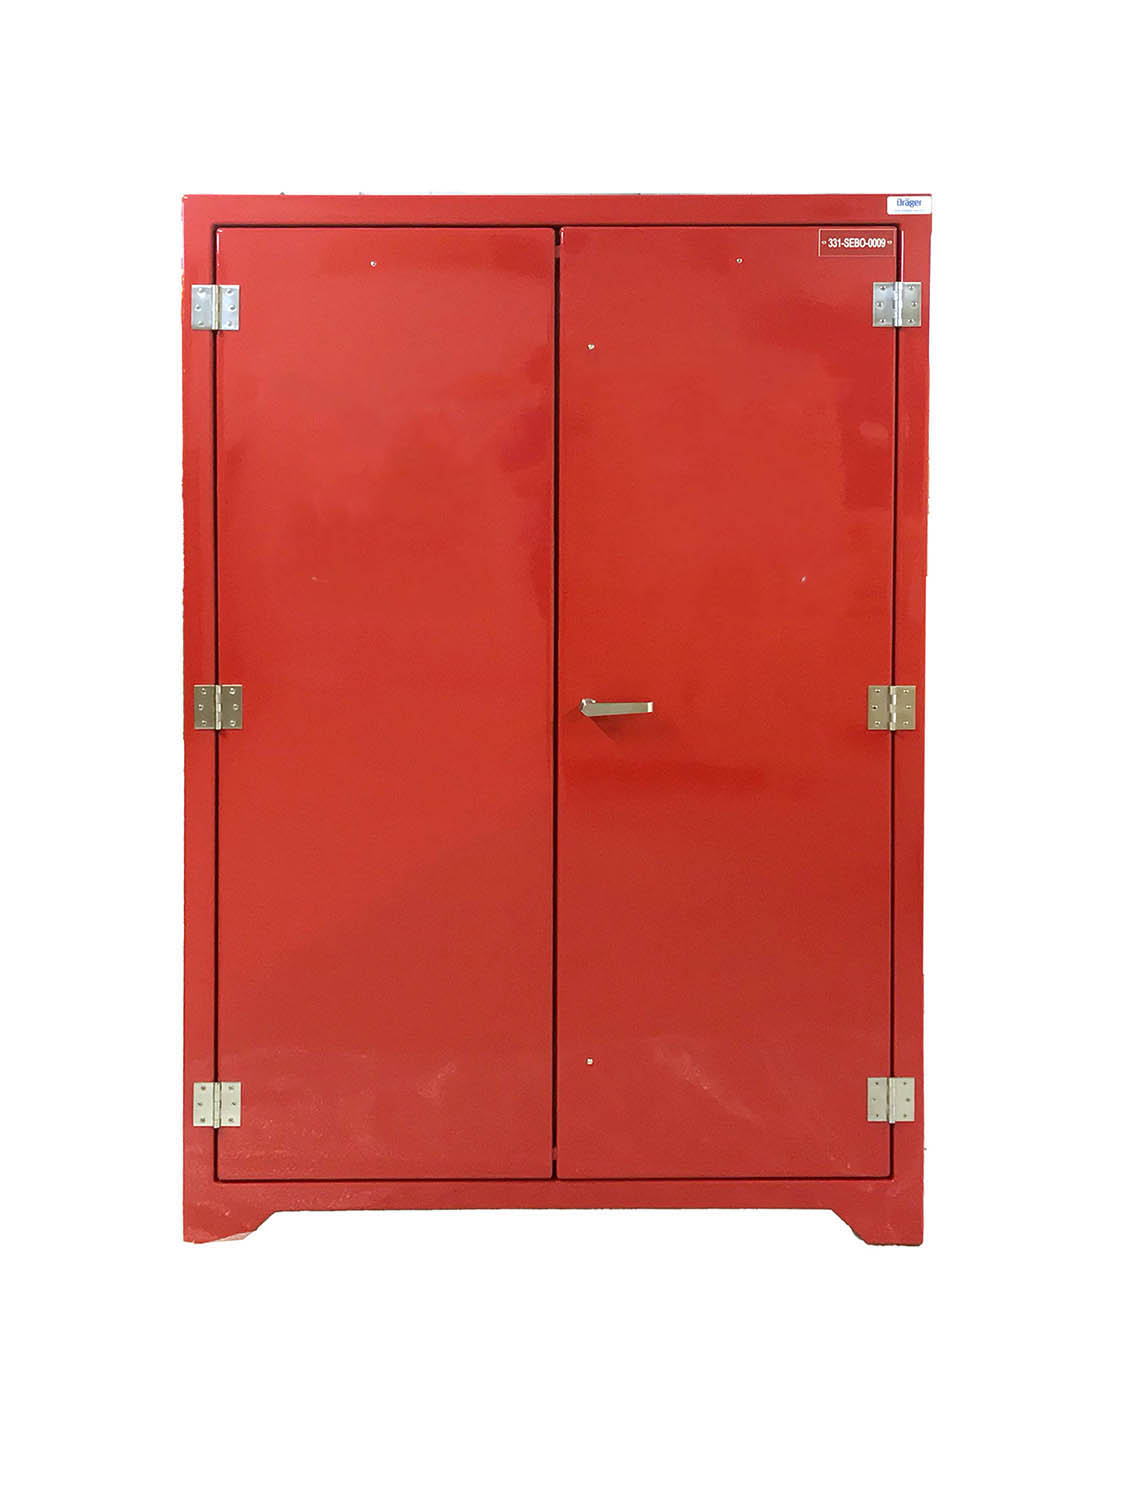 SG02130 GRP storage cabinet: DMO-04 Dräger Marine & Offshore cabinets are designed for tough offshore conditions. Manufactured from durable GRP material, these cabinets are rated to IP56, certified by Lloyds. All cabinets are manufactured with stainless steel locks and hinges. The cabinets can be configured to suit different storage requirements.